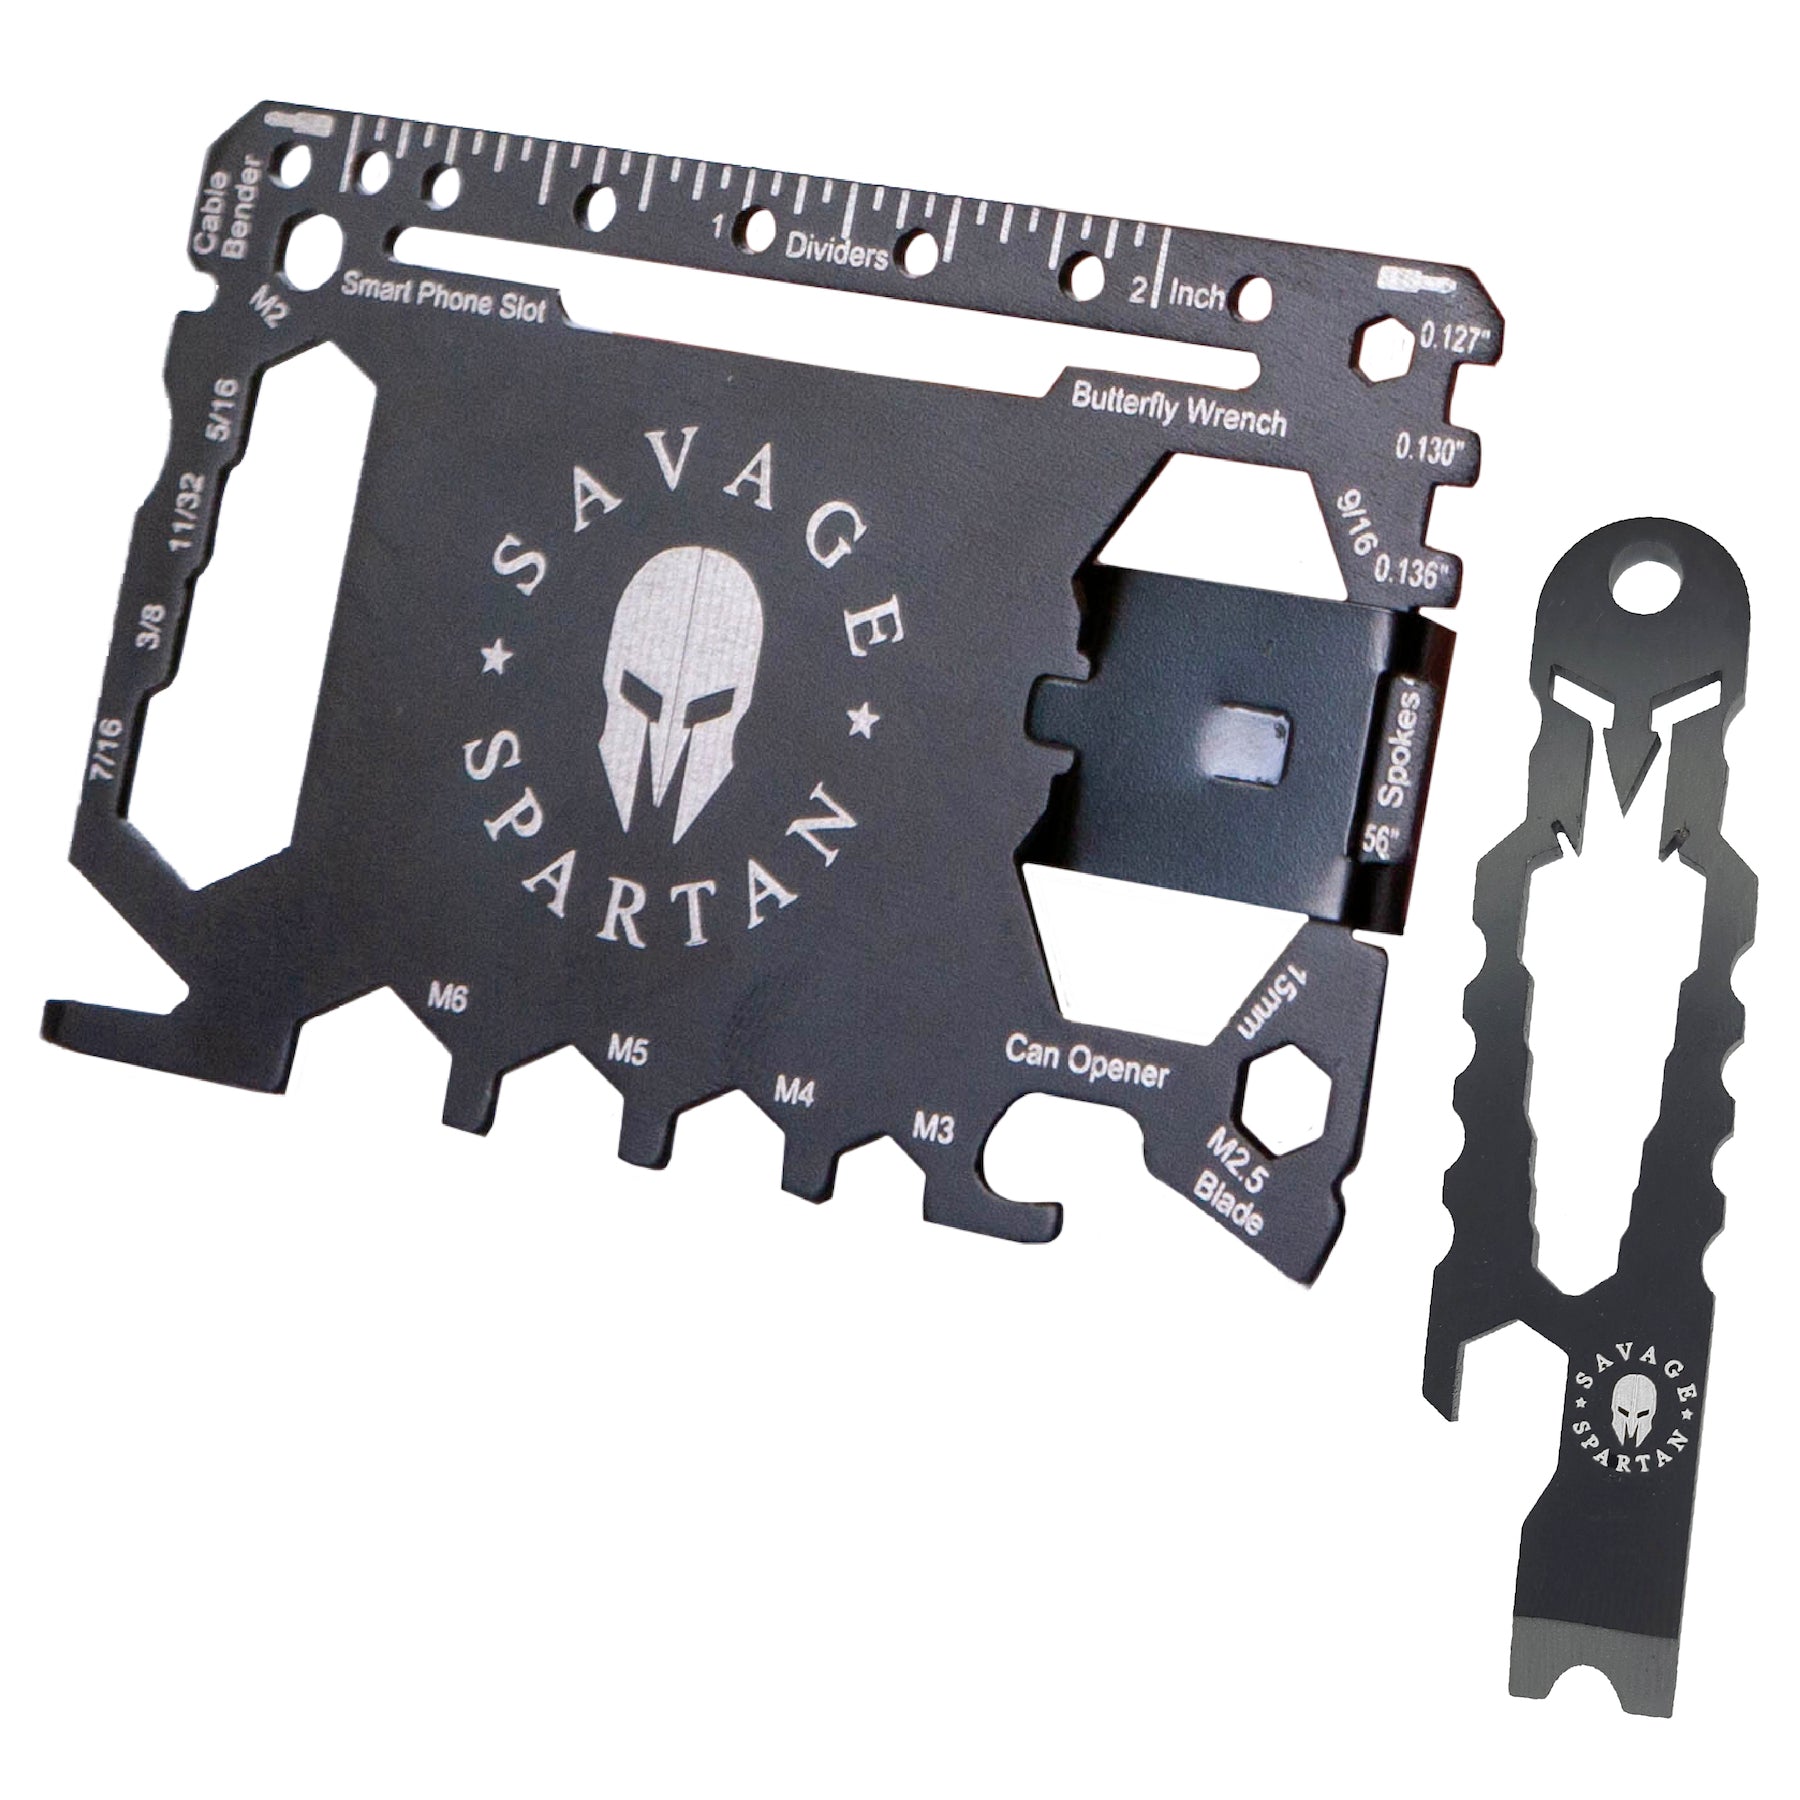 The savage spartan survival wallet multitool fits inside your wallet and includes a keychain multitool